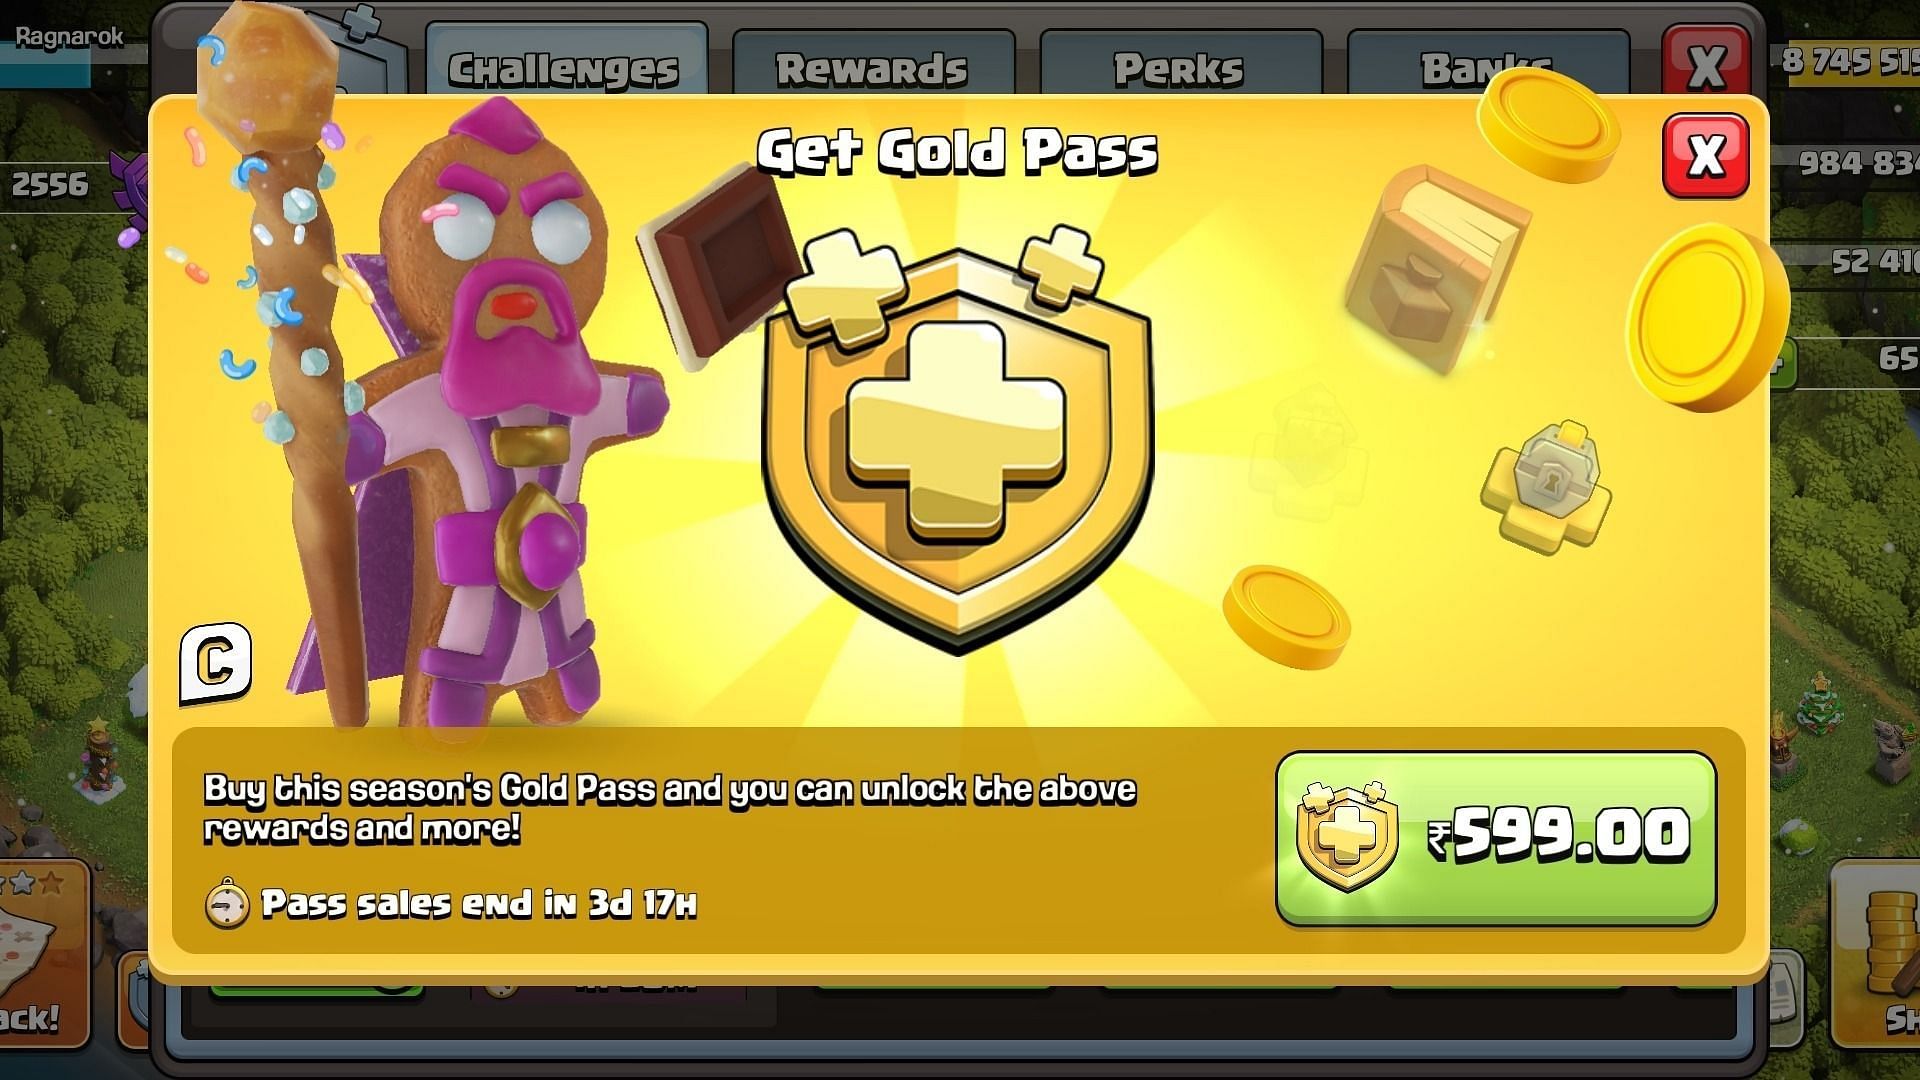 Get free Gold Pass in Clash of Clans (Image via Supercell)